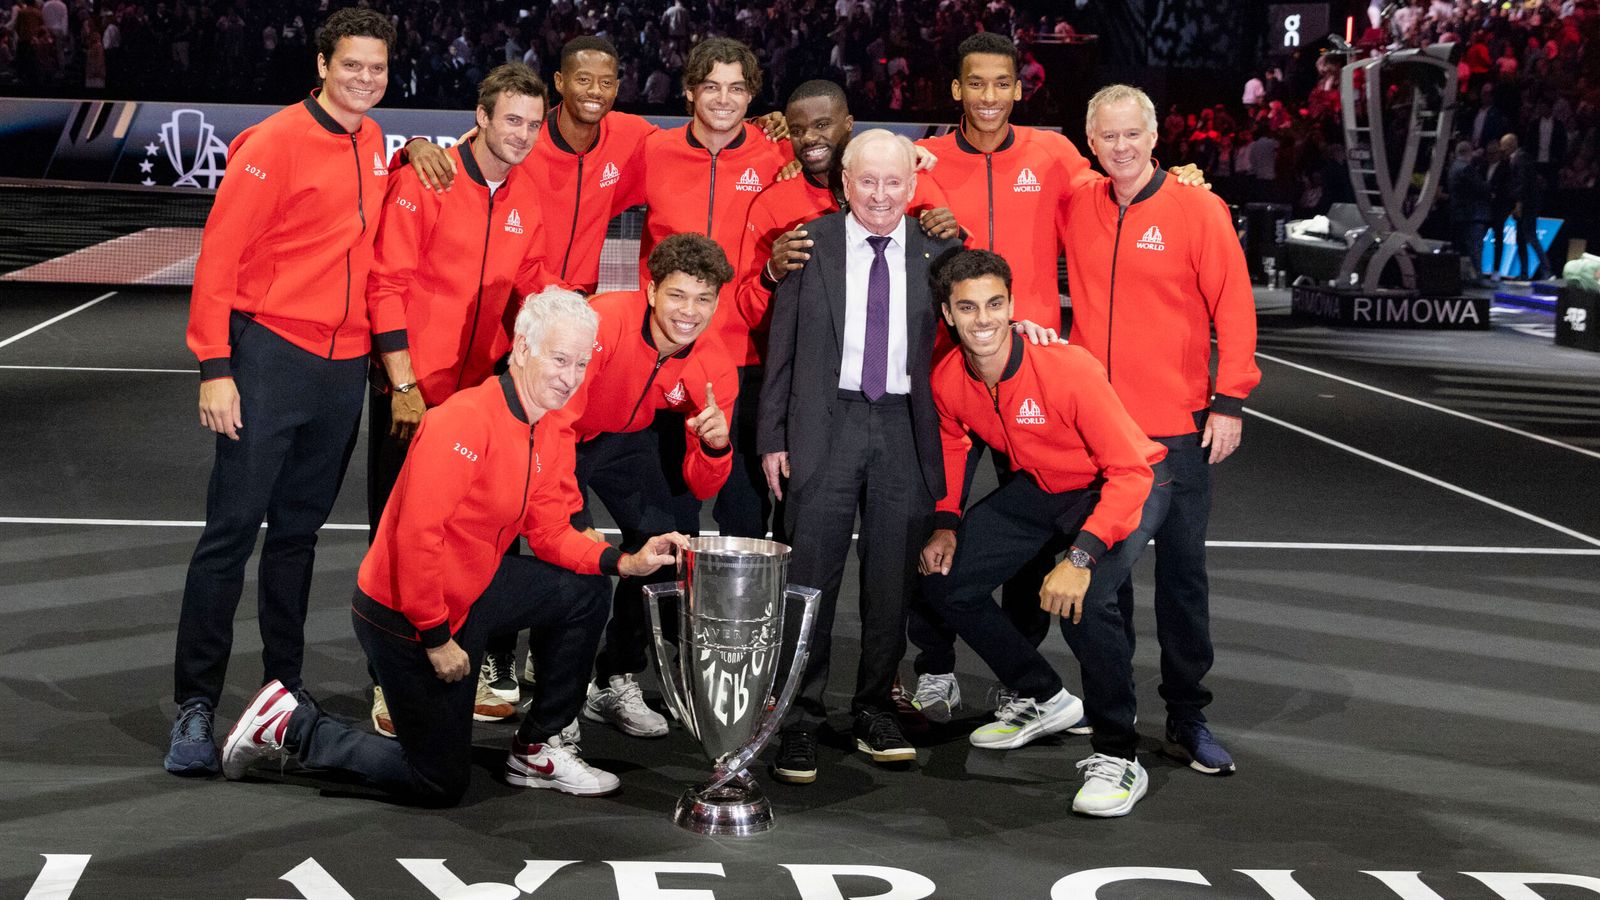 Laver Cup Ben Shelton and Frances Tiafoe help Team World to title in front of Roger Federer Tennis News Sky Sports